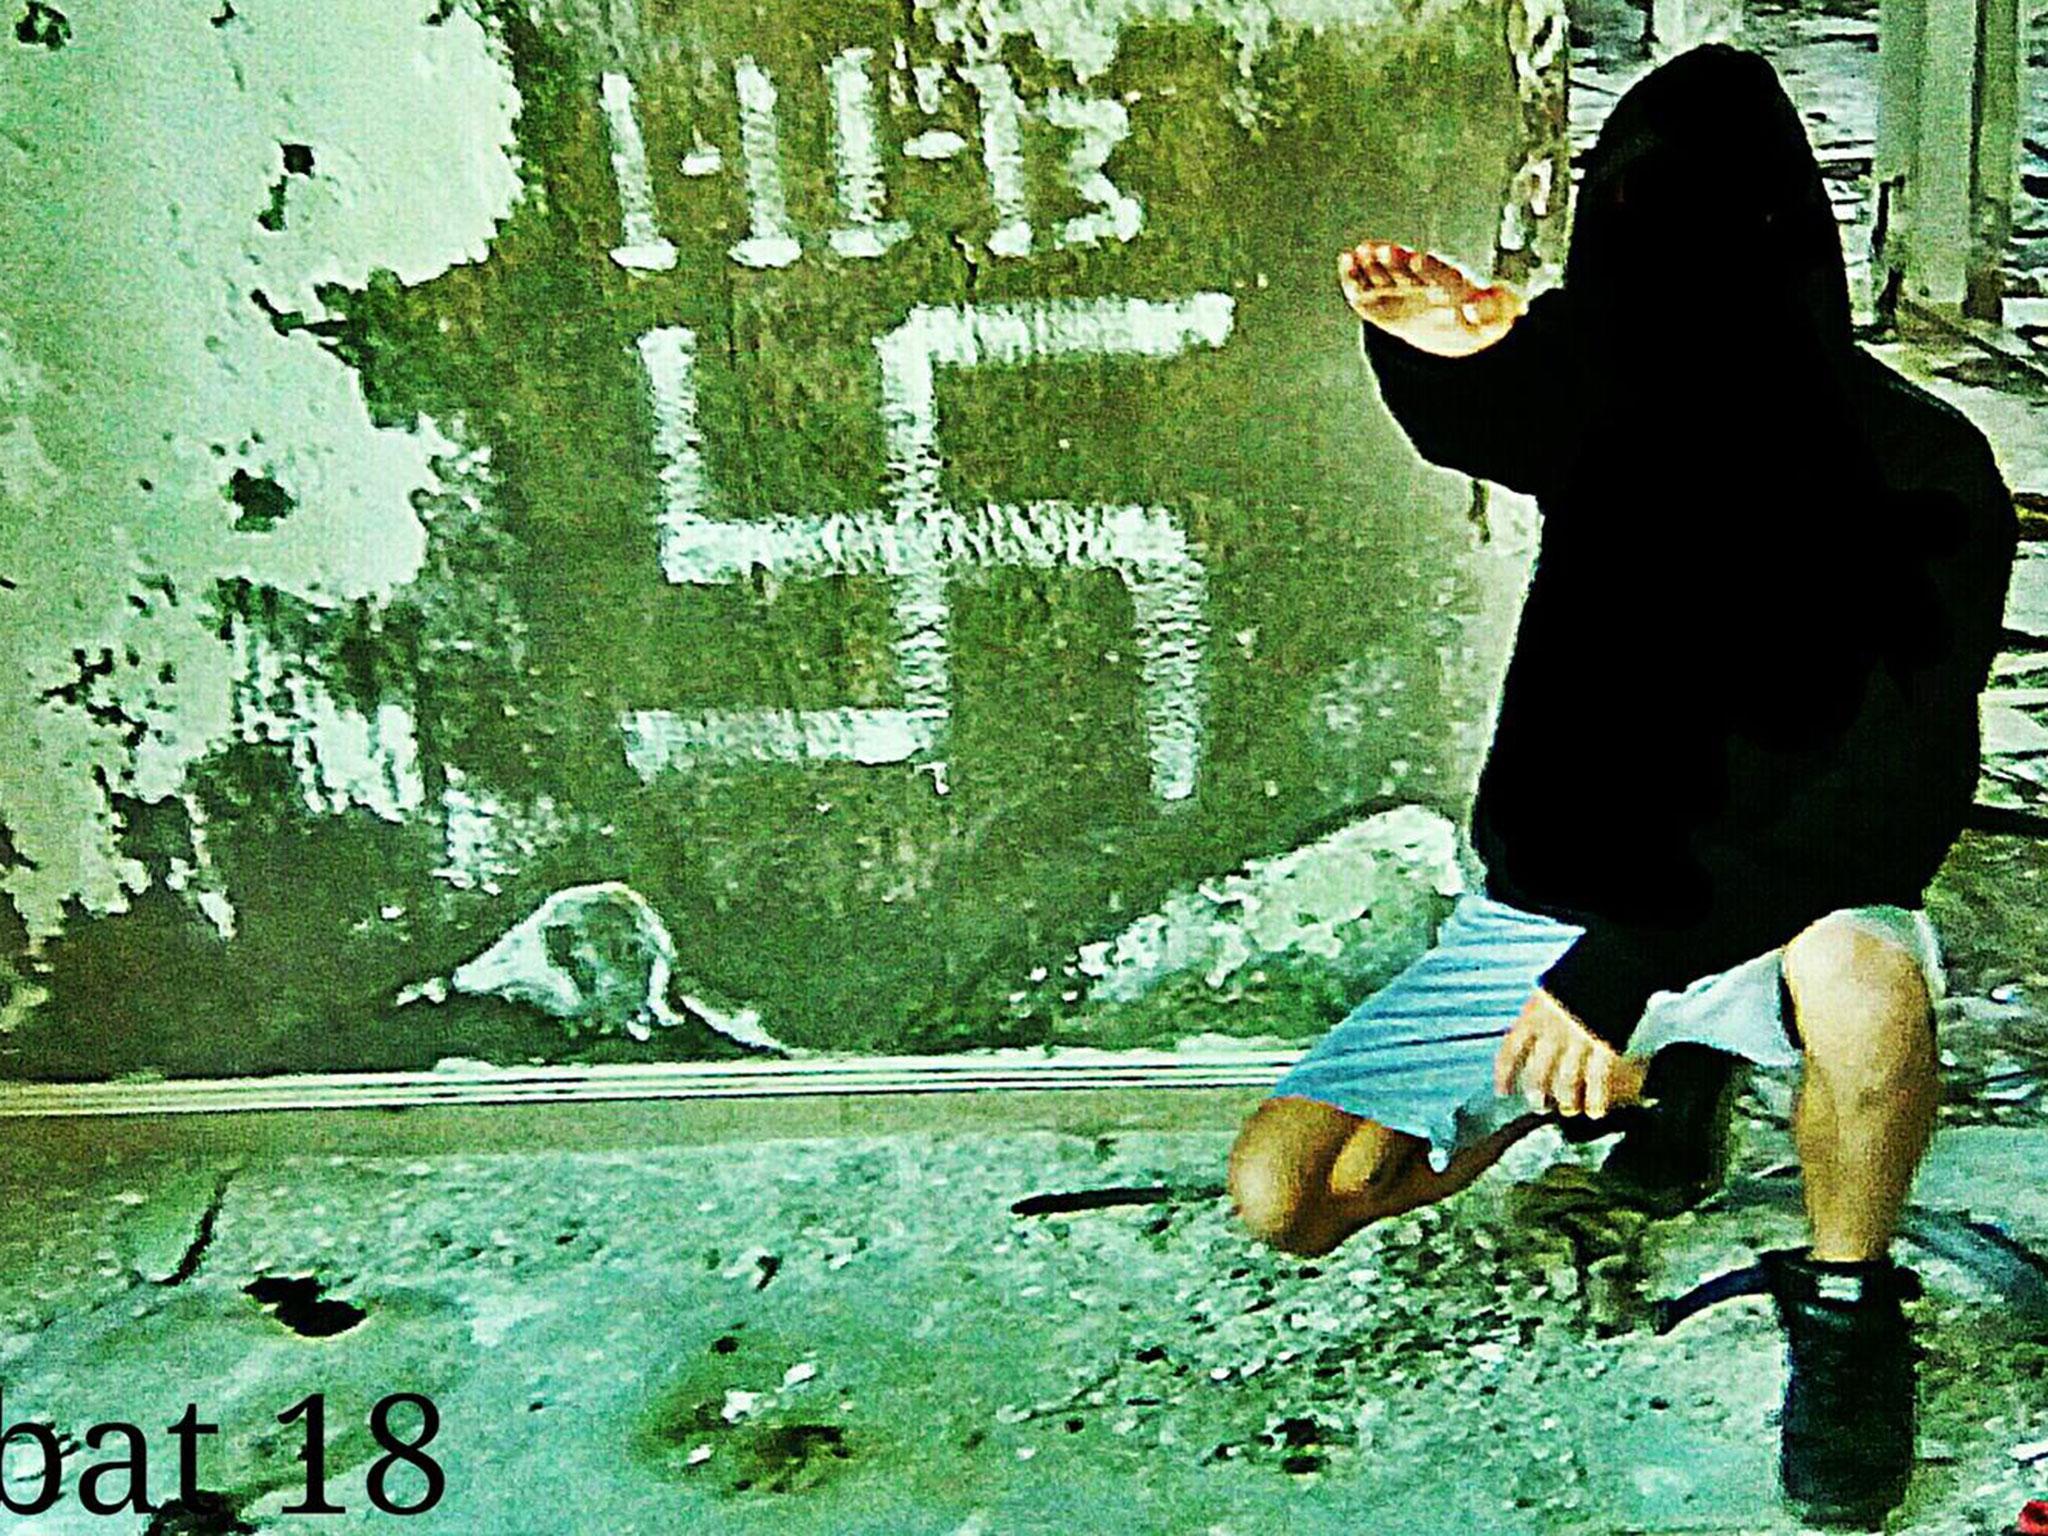 The cover photo on the Facebook page for the Greek branch of neo-Nazi group Combat 18, which was reported to Facebook but not removed